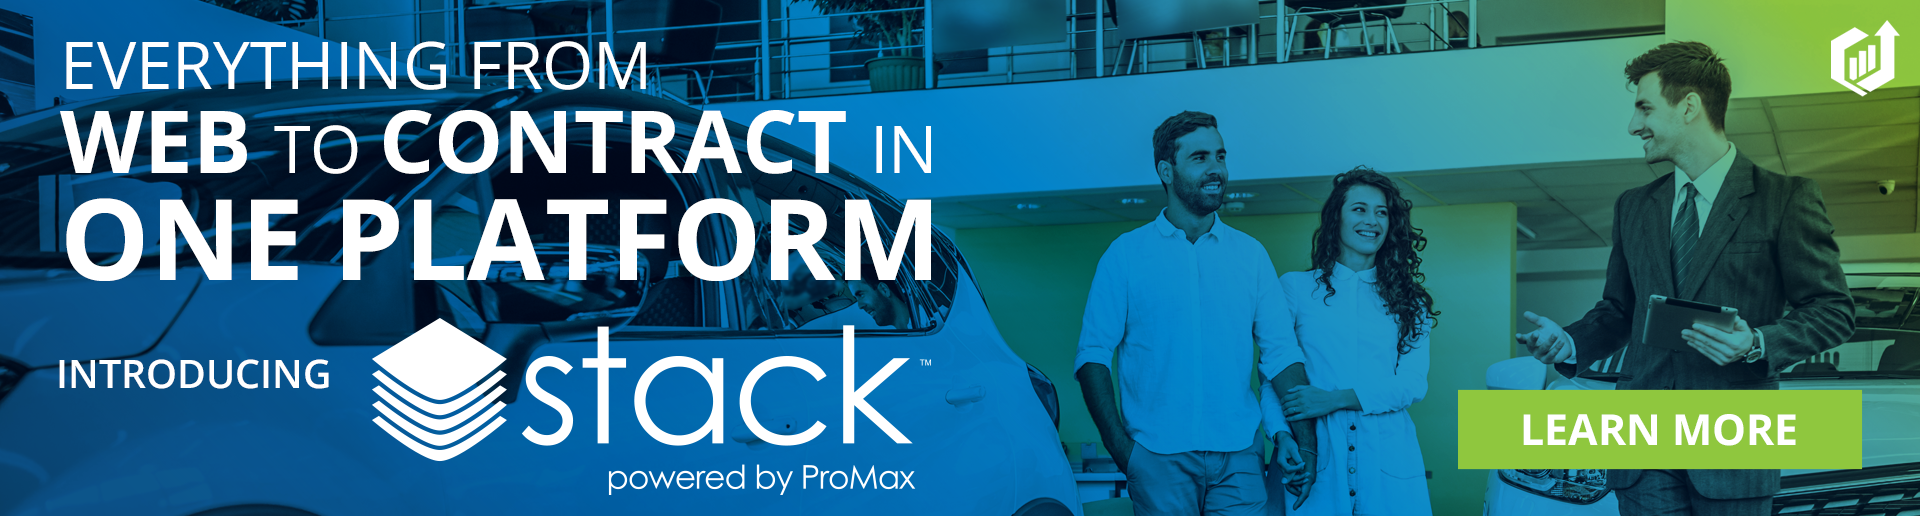 Stack - Powered by ProMax